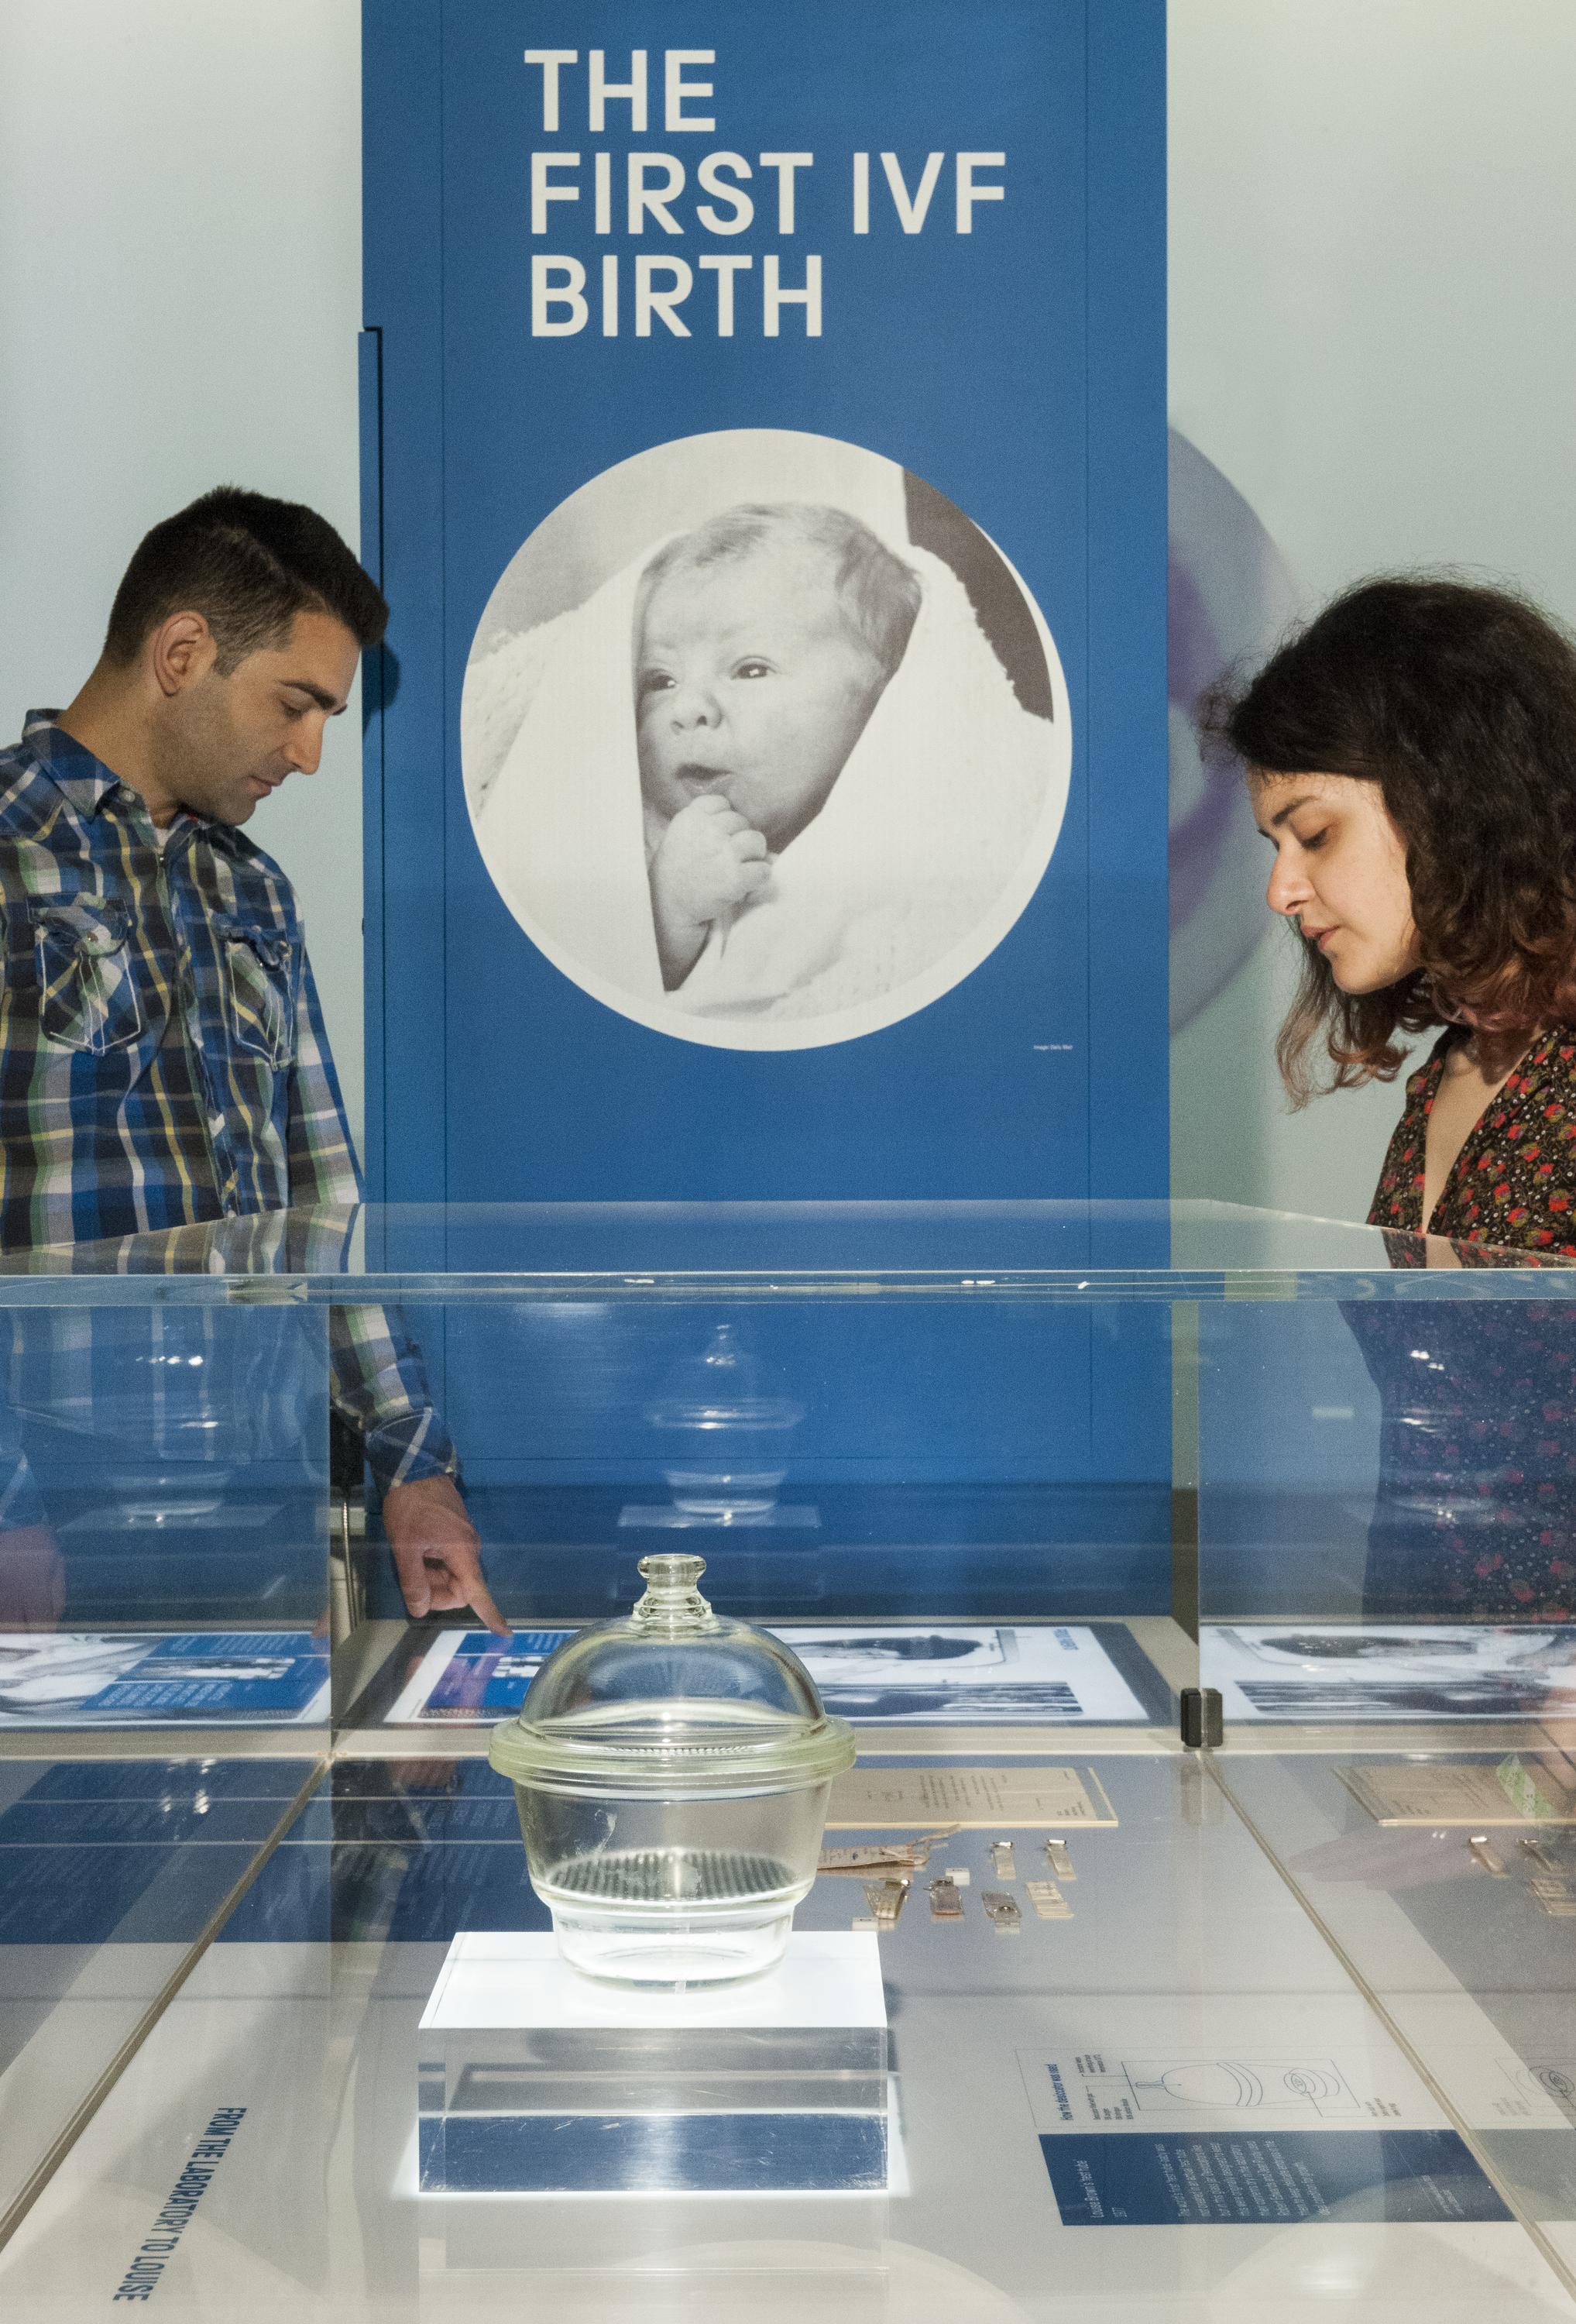 A man and a woman examine some objects in a glass case at the Science Museum's IVF exhibition. Behind them is a poster that displays an image of Louise Brown as a baby, with the text 'The first IVF birth'.